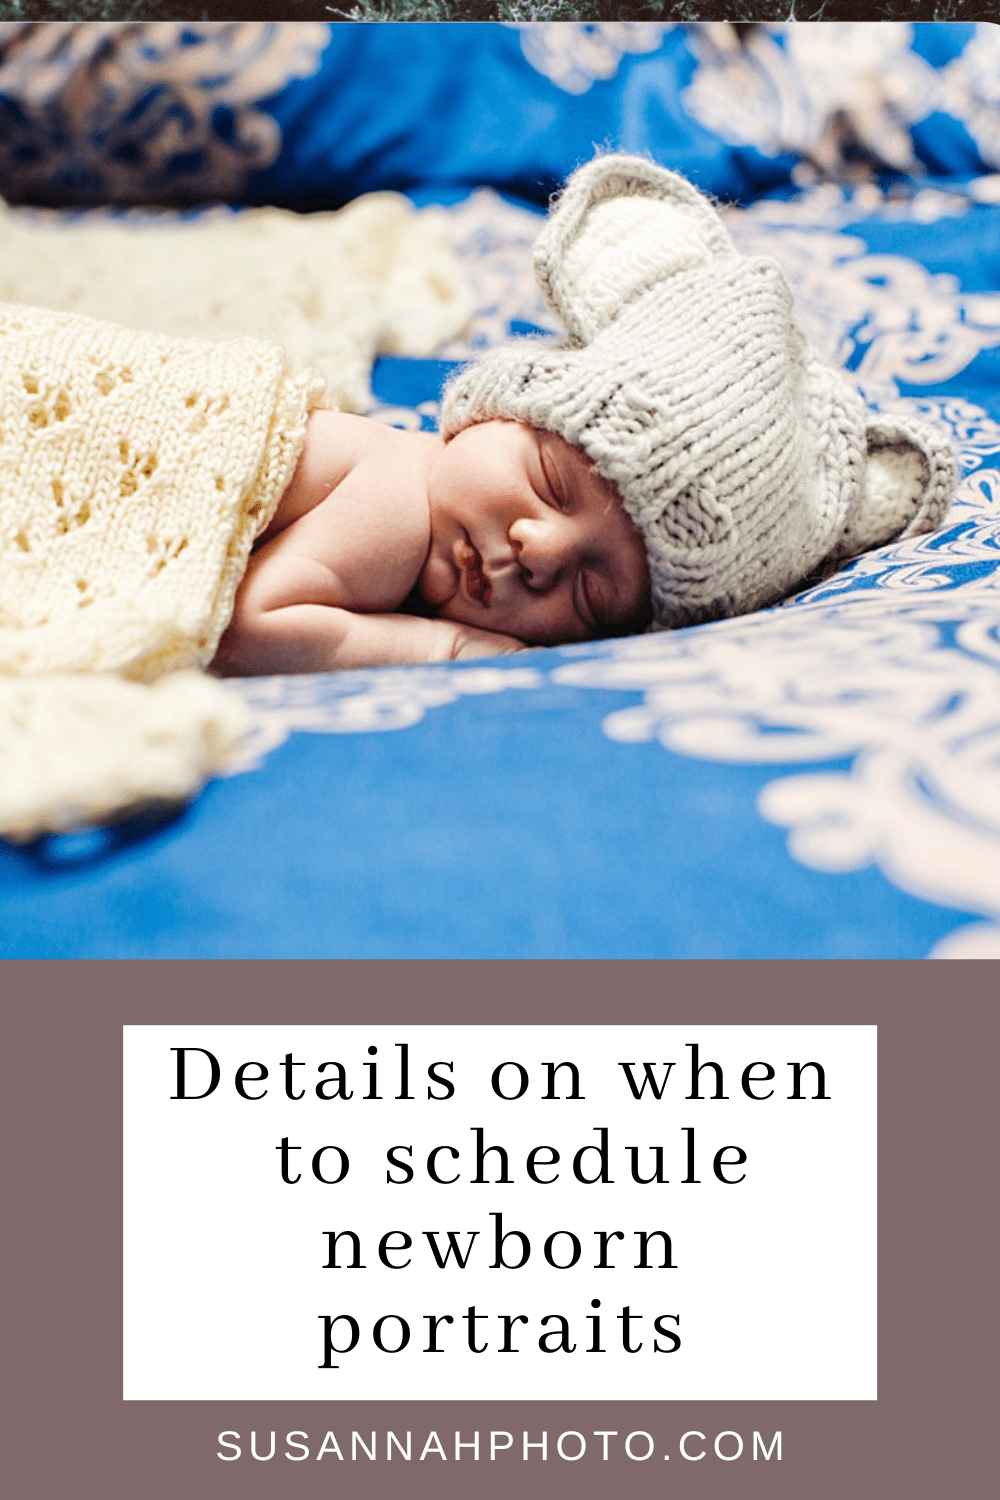 Image of sleeping baby with text that reads "Details on when to schedule newborn portrait."